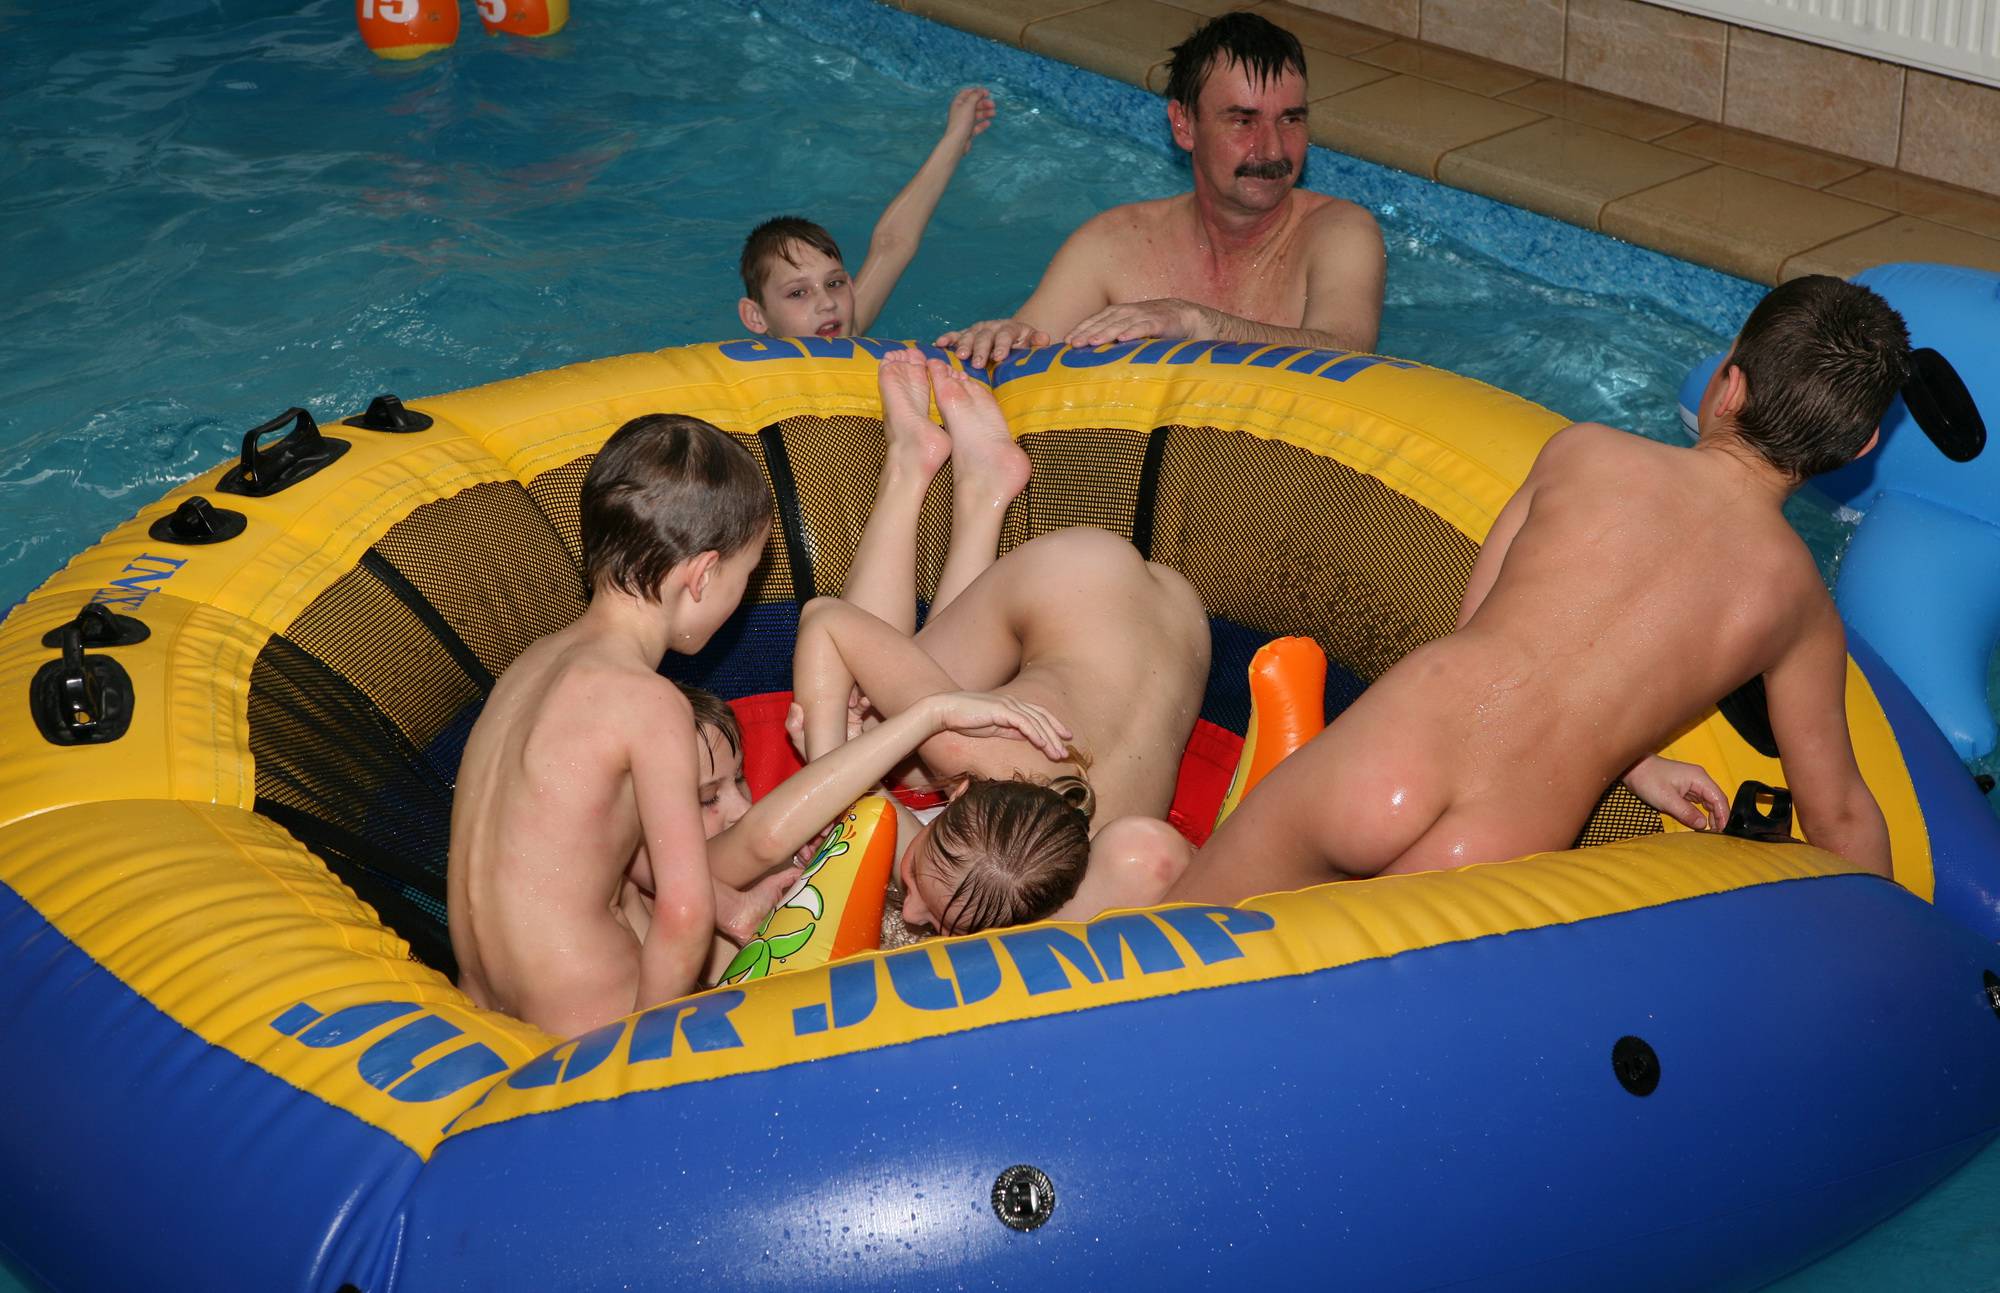 Pure Nudism Images-Naturist Family Event 29 - 3